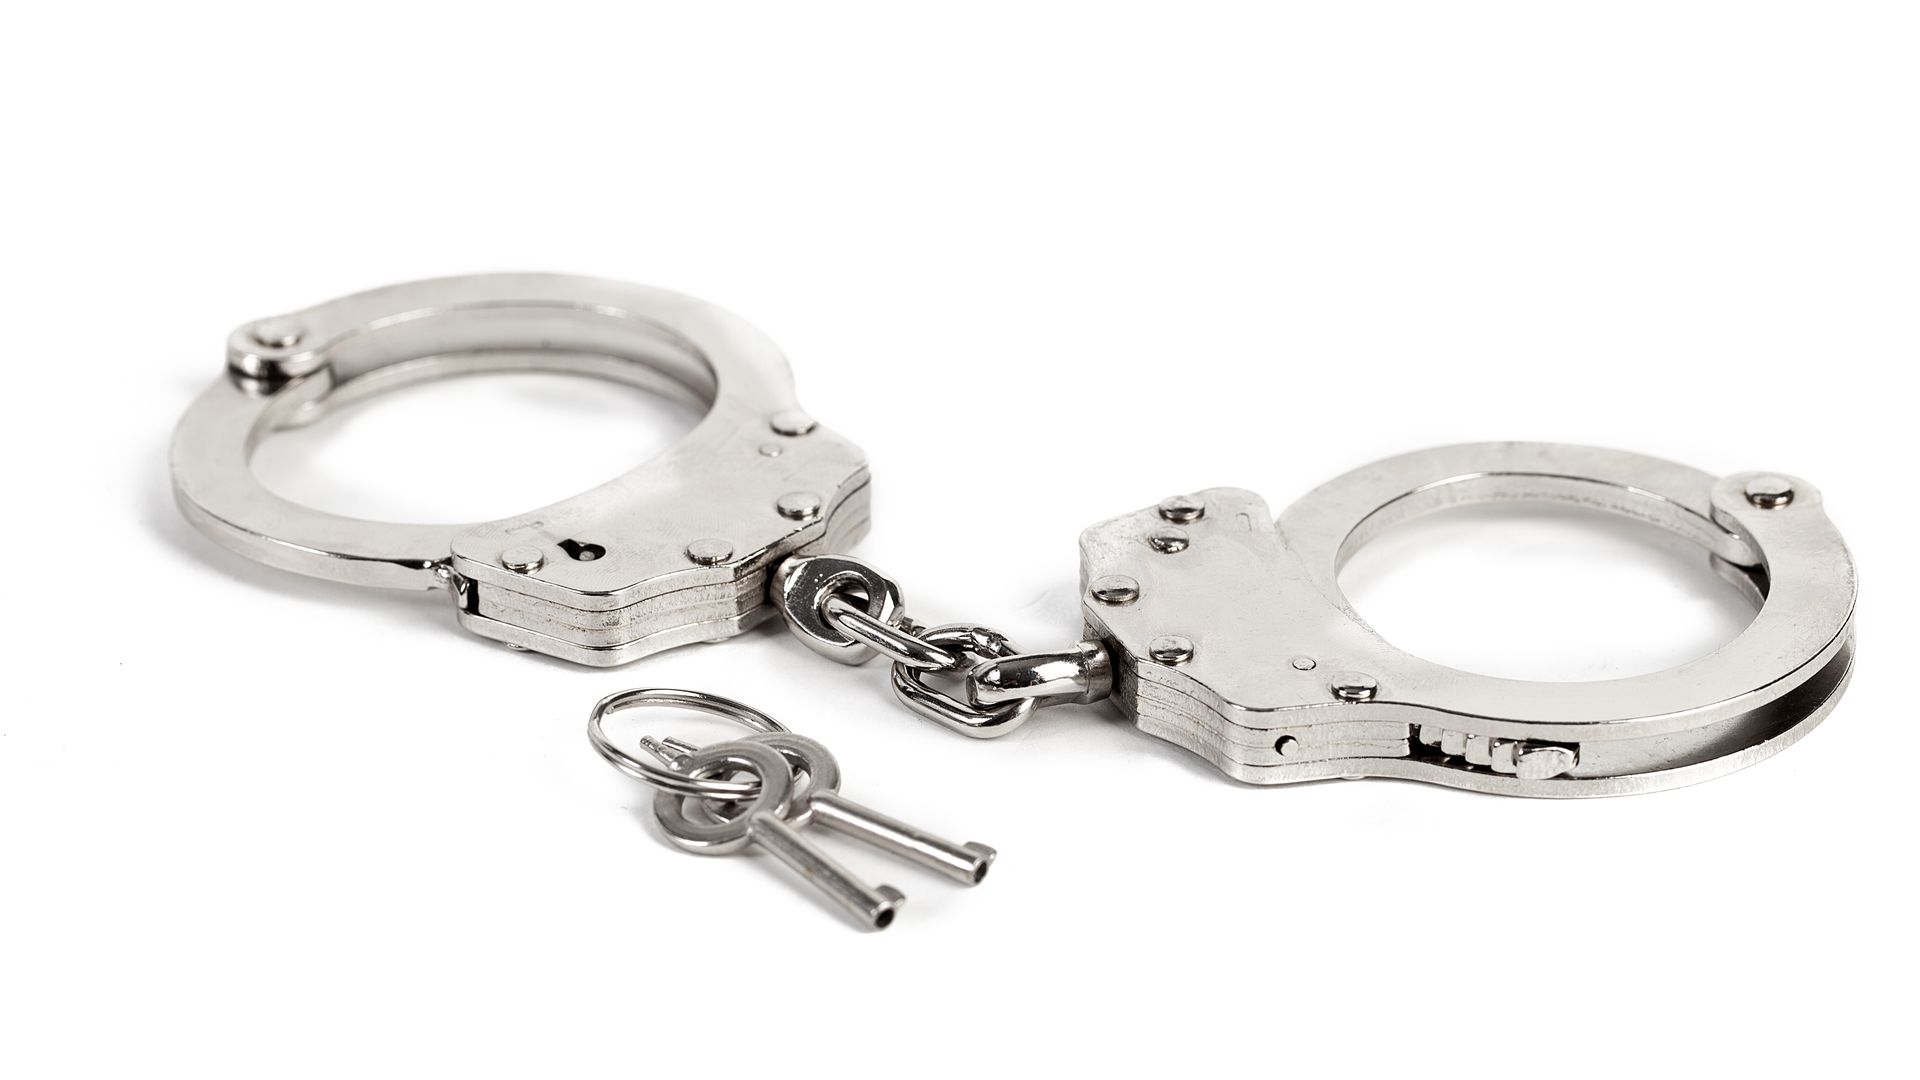 High Angle View Of Handcuffs Against White Background